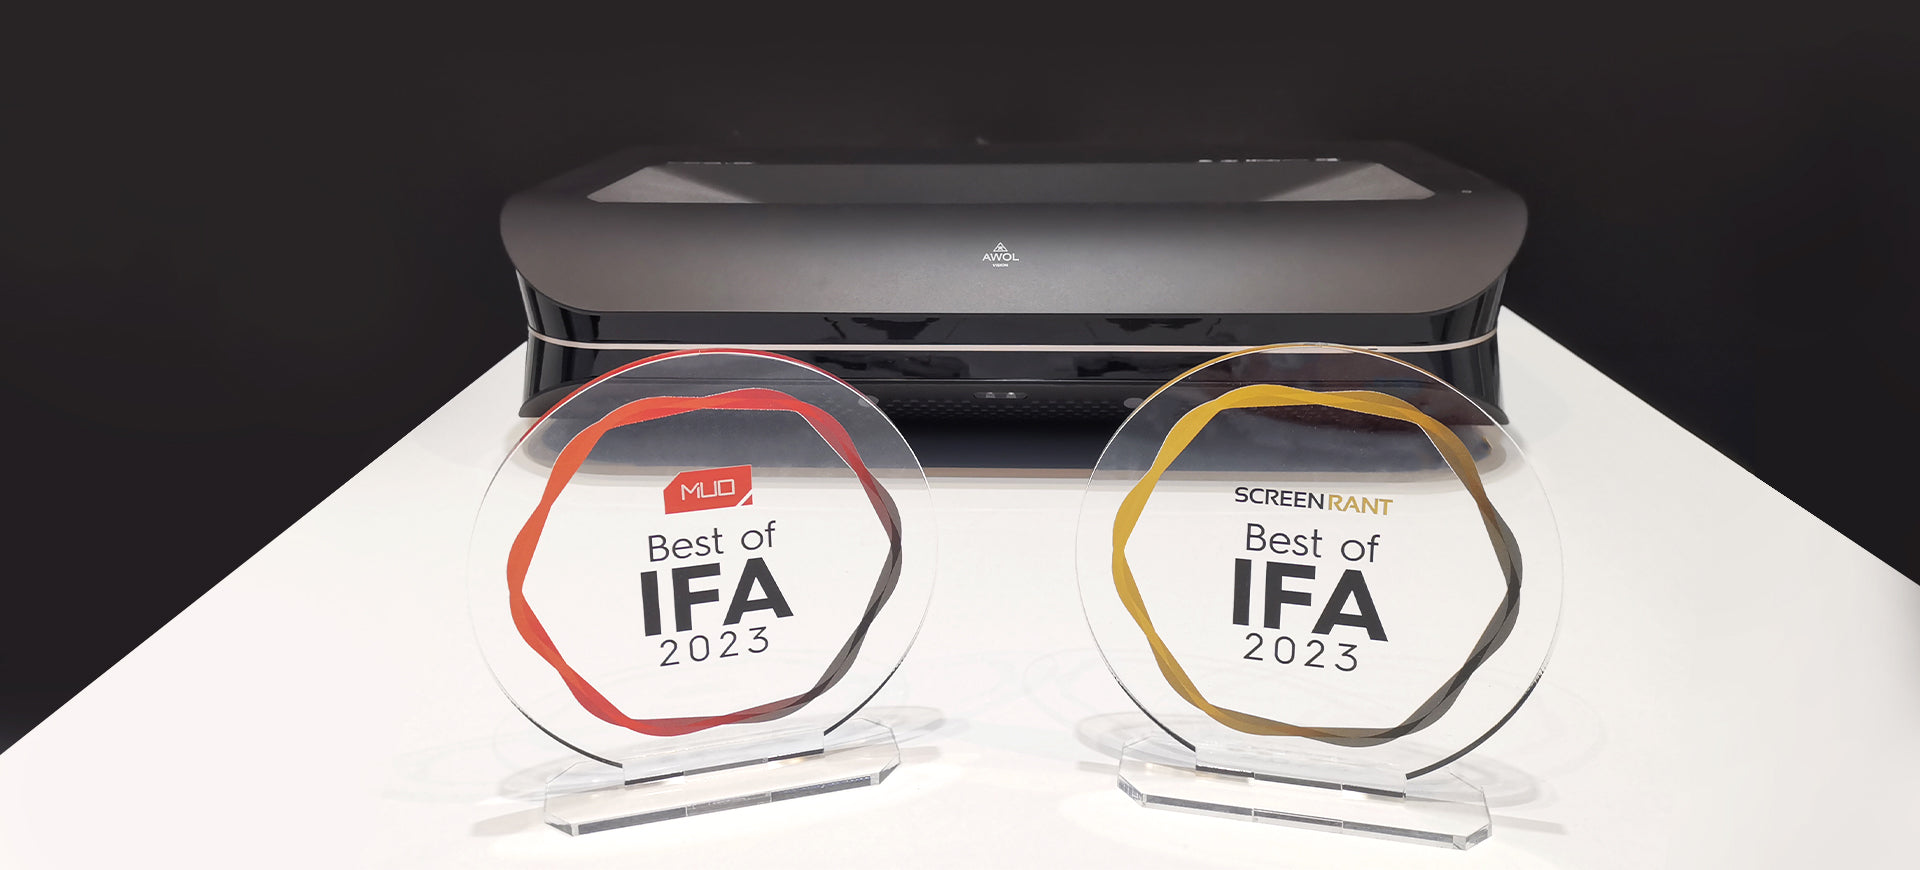 AWOL Vision Wins Best of IFA Awards for 2023